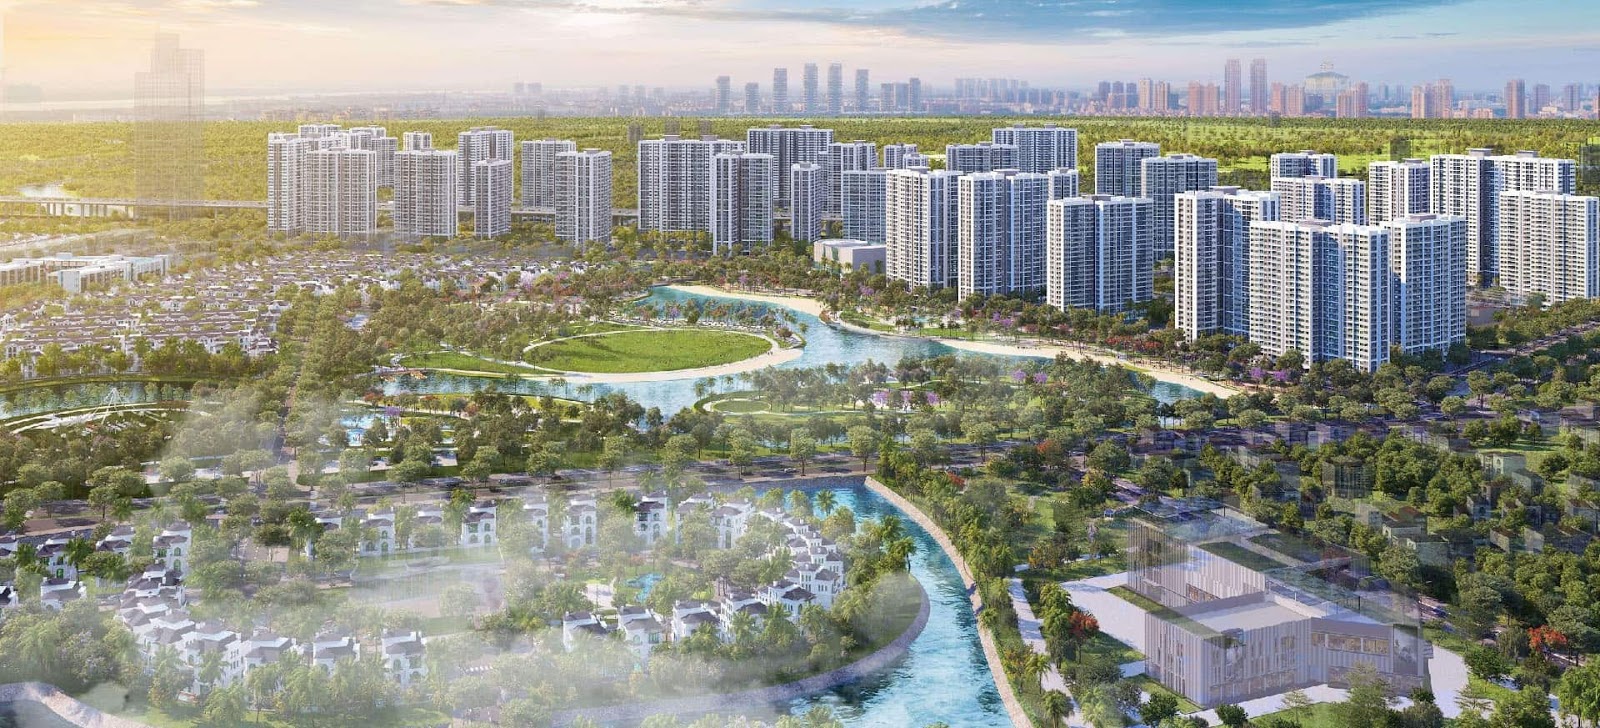 Overview of Vinhomes Grand Park